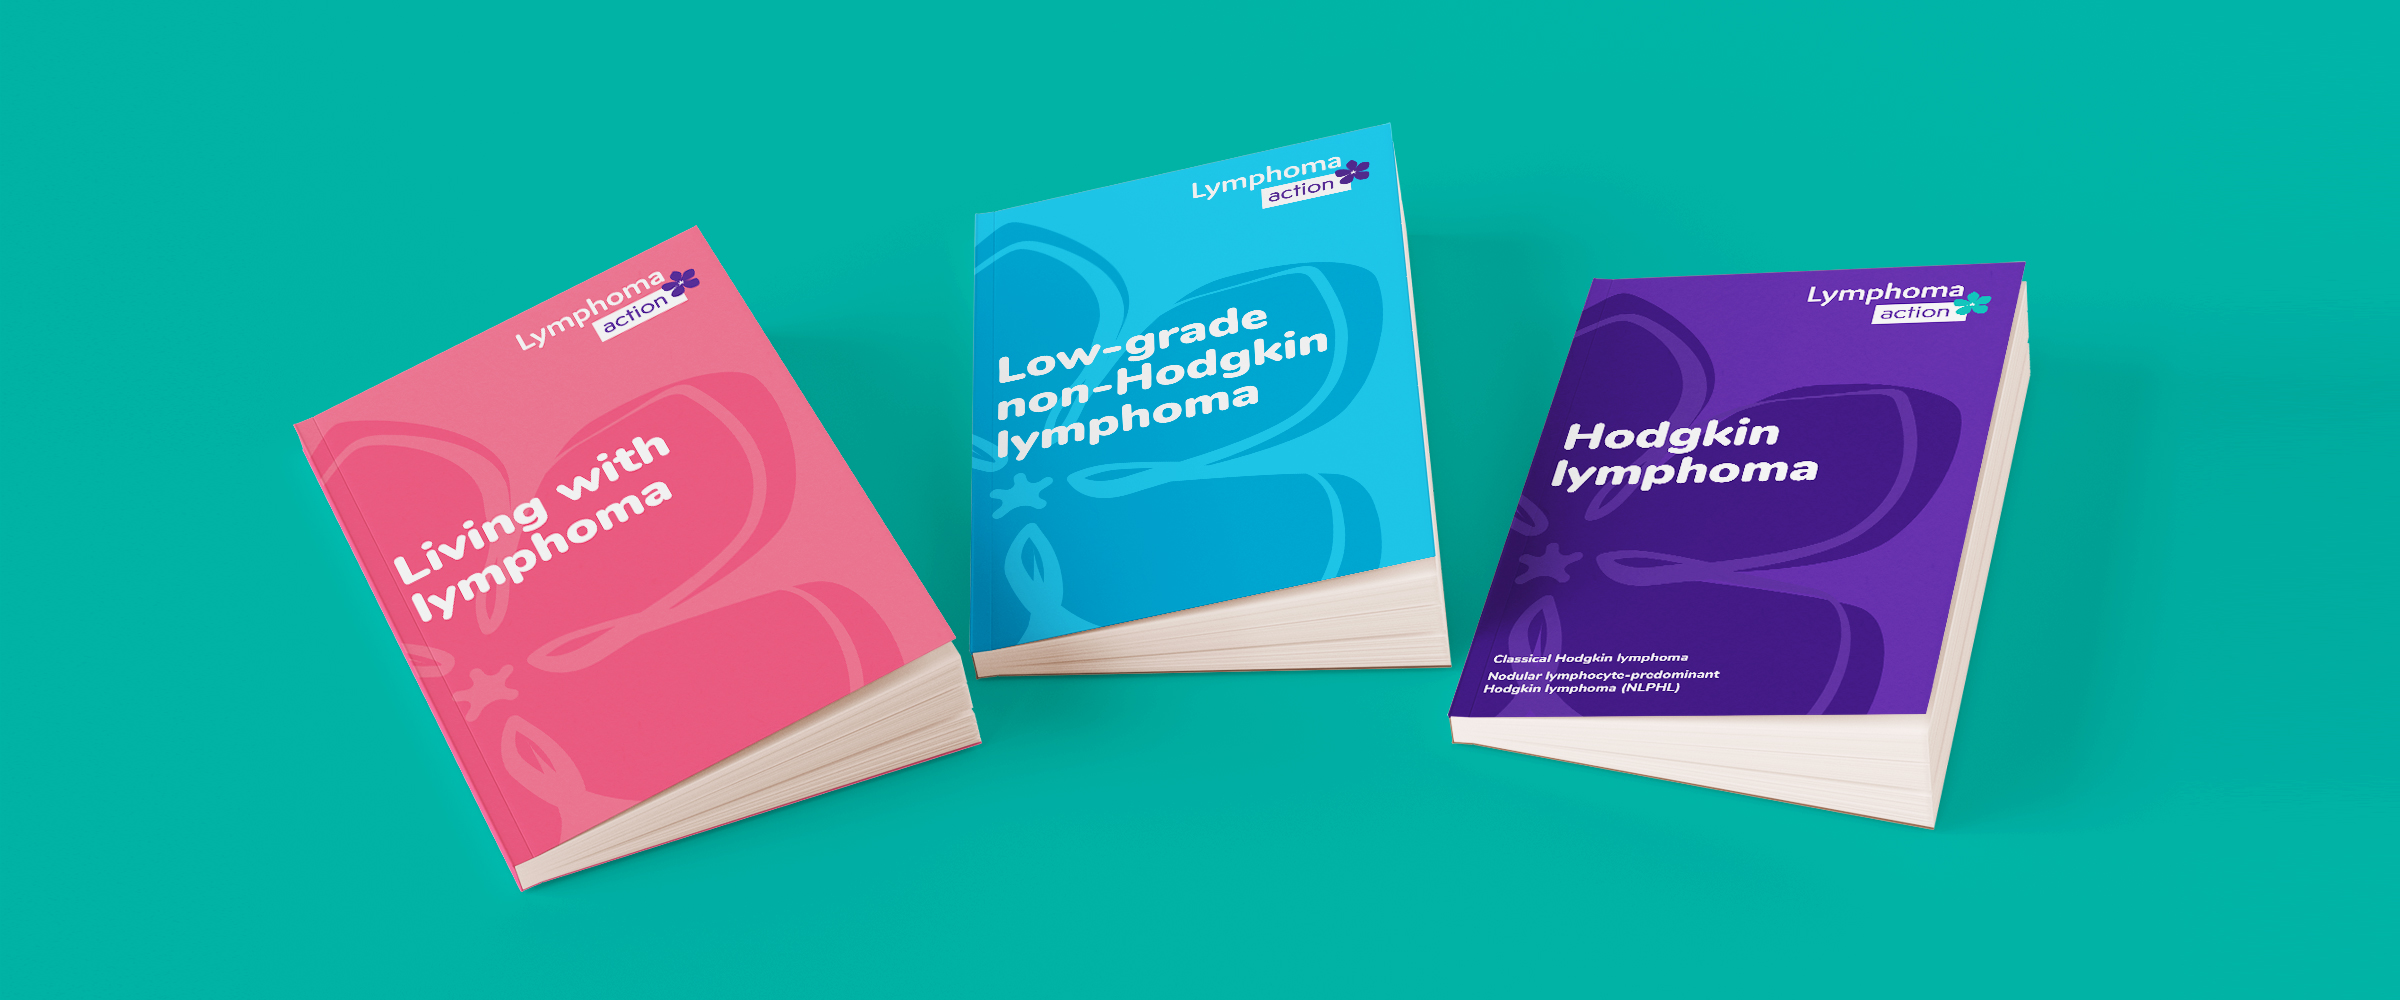 Lymphoma Action Patient Information Booklets